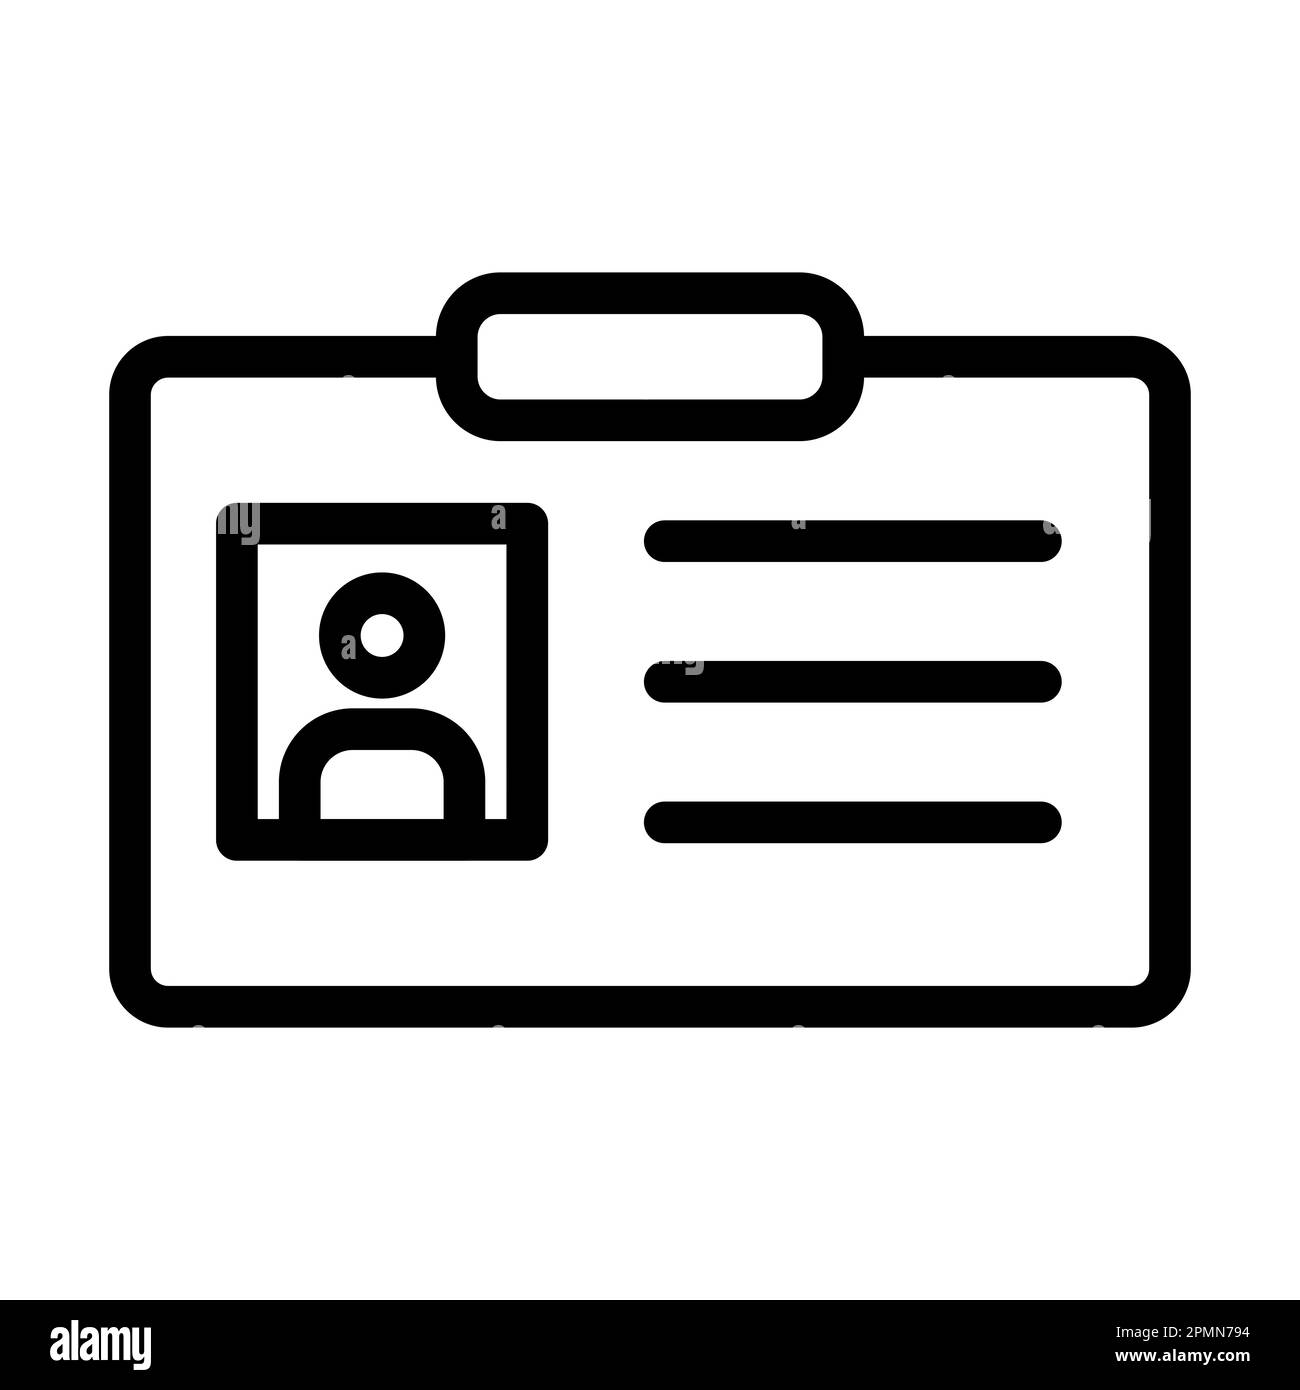 Identity Card Vector Thick Line Icon For Personal And Commercial Use. Stock Photo